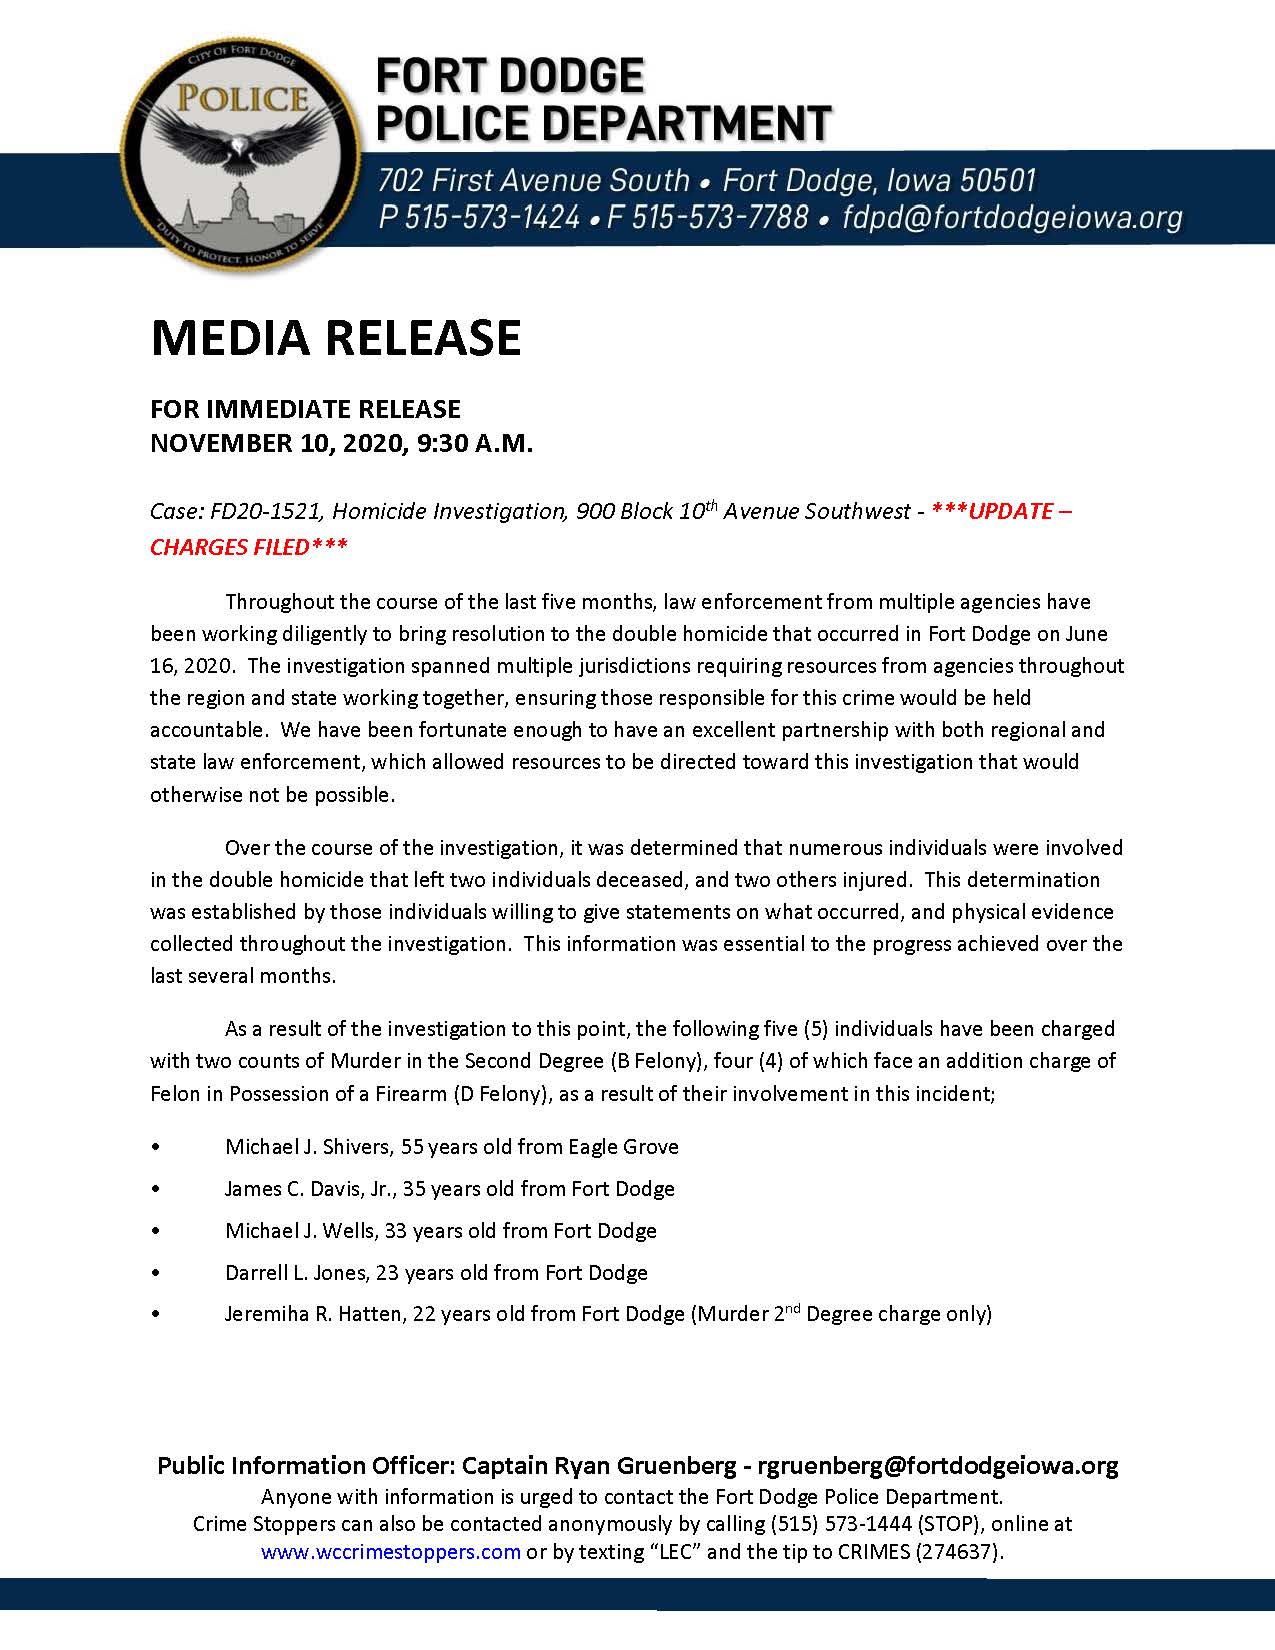 Link to press release on double homicide of June 2020 from Fort Dodge Police Department.